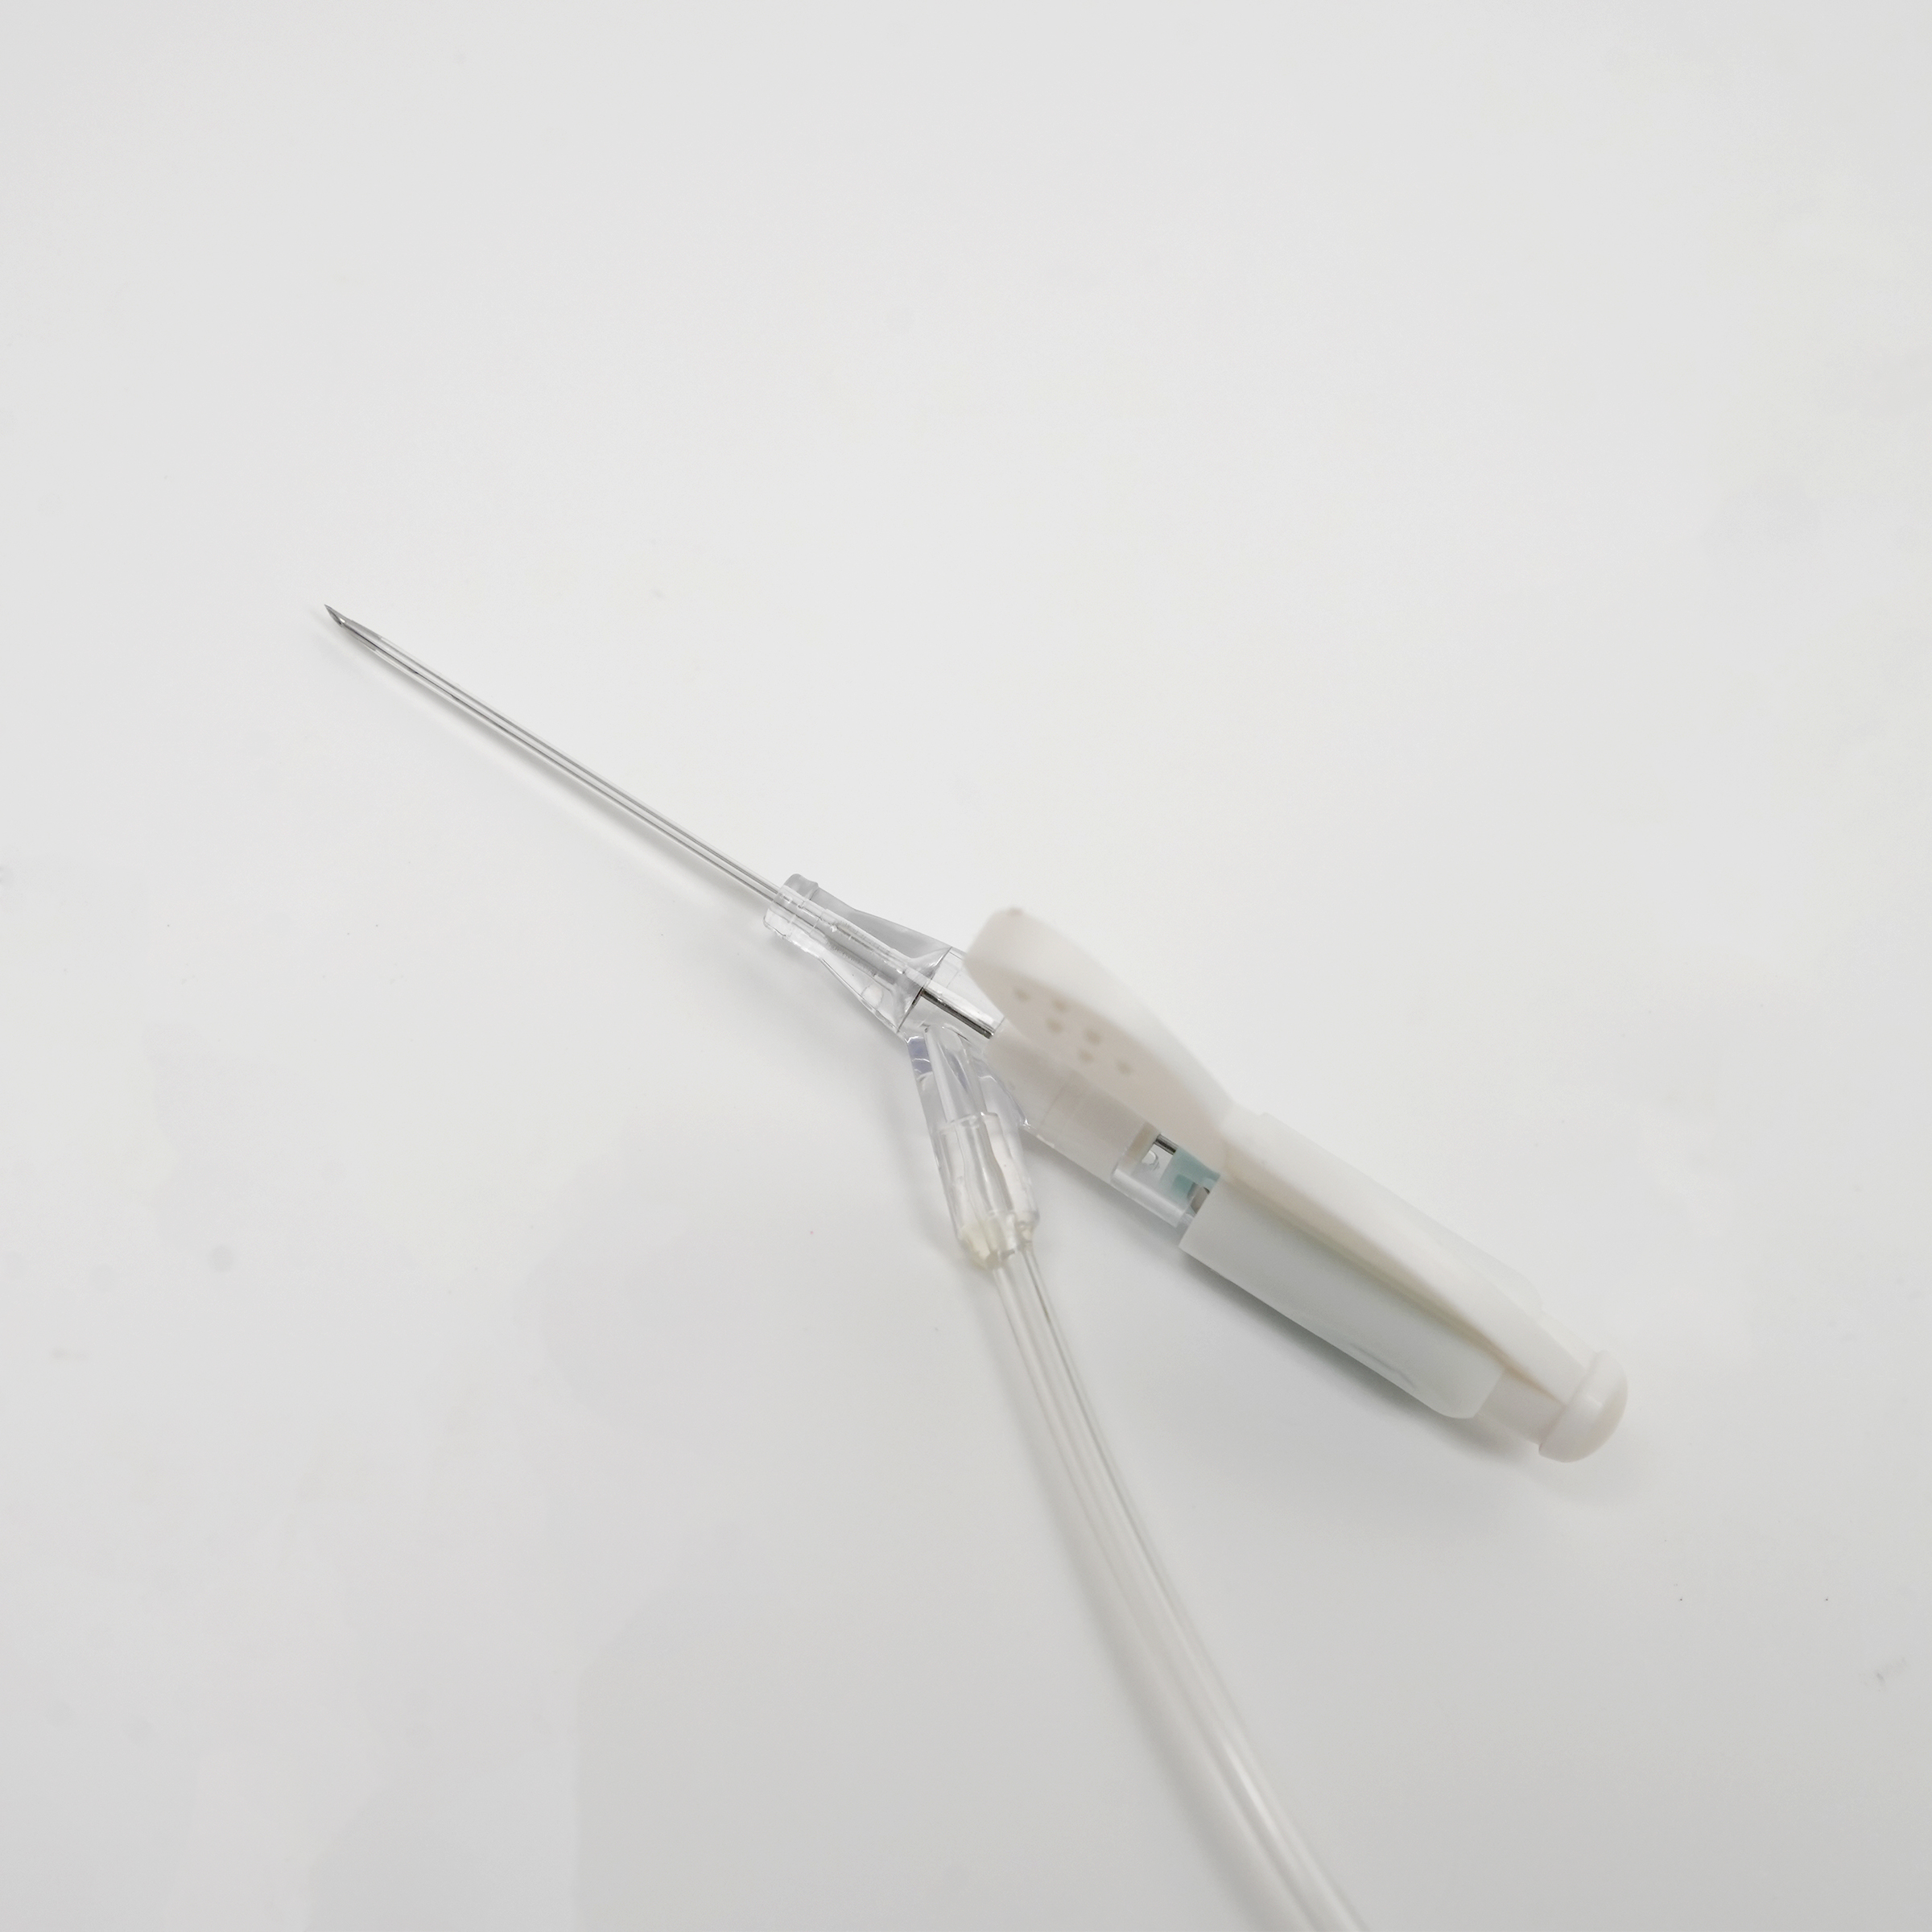 Endotracheal Tube: Uses, Procedure, Risks, and More